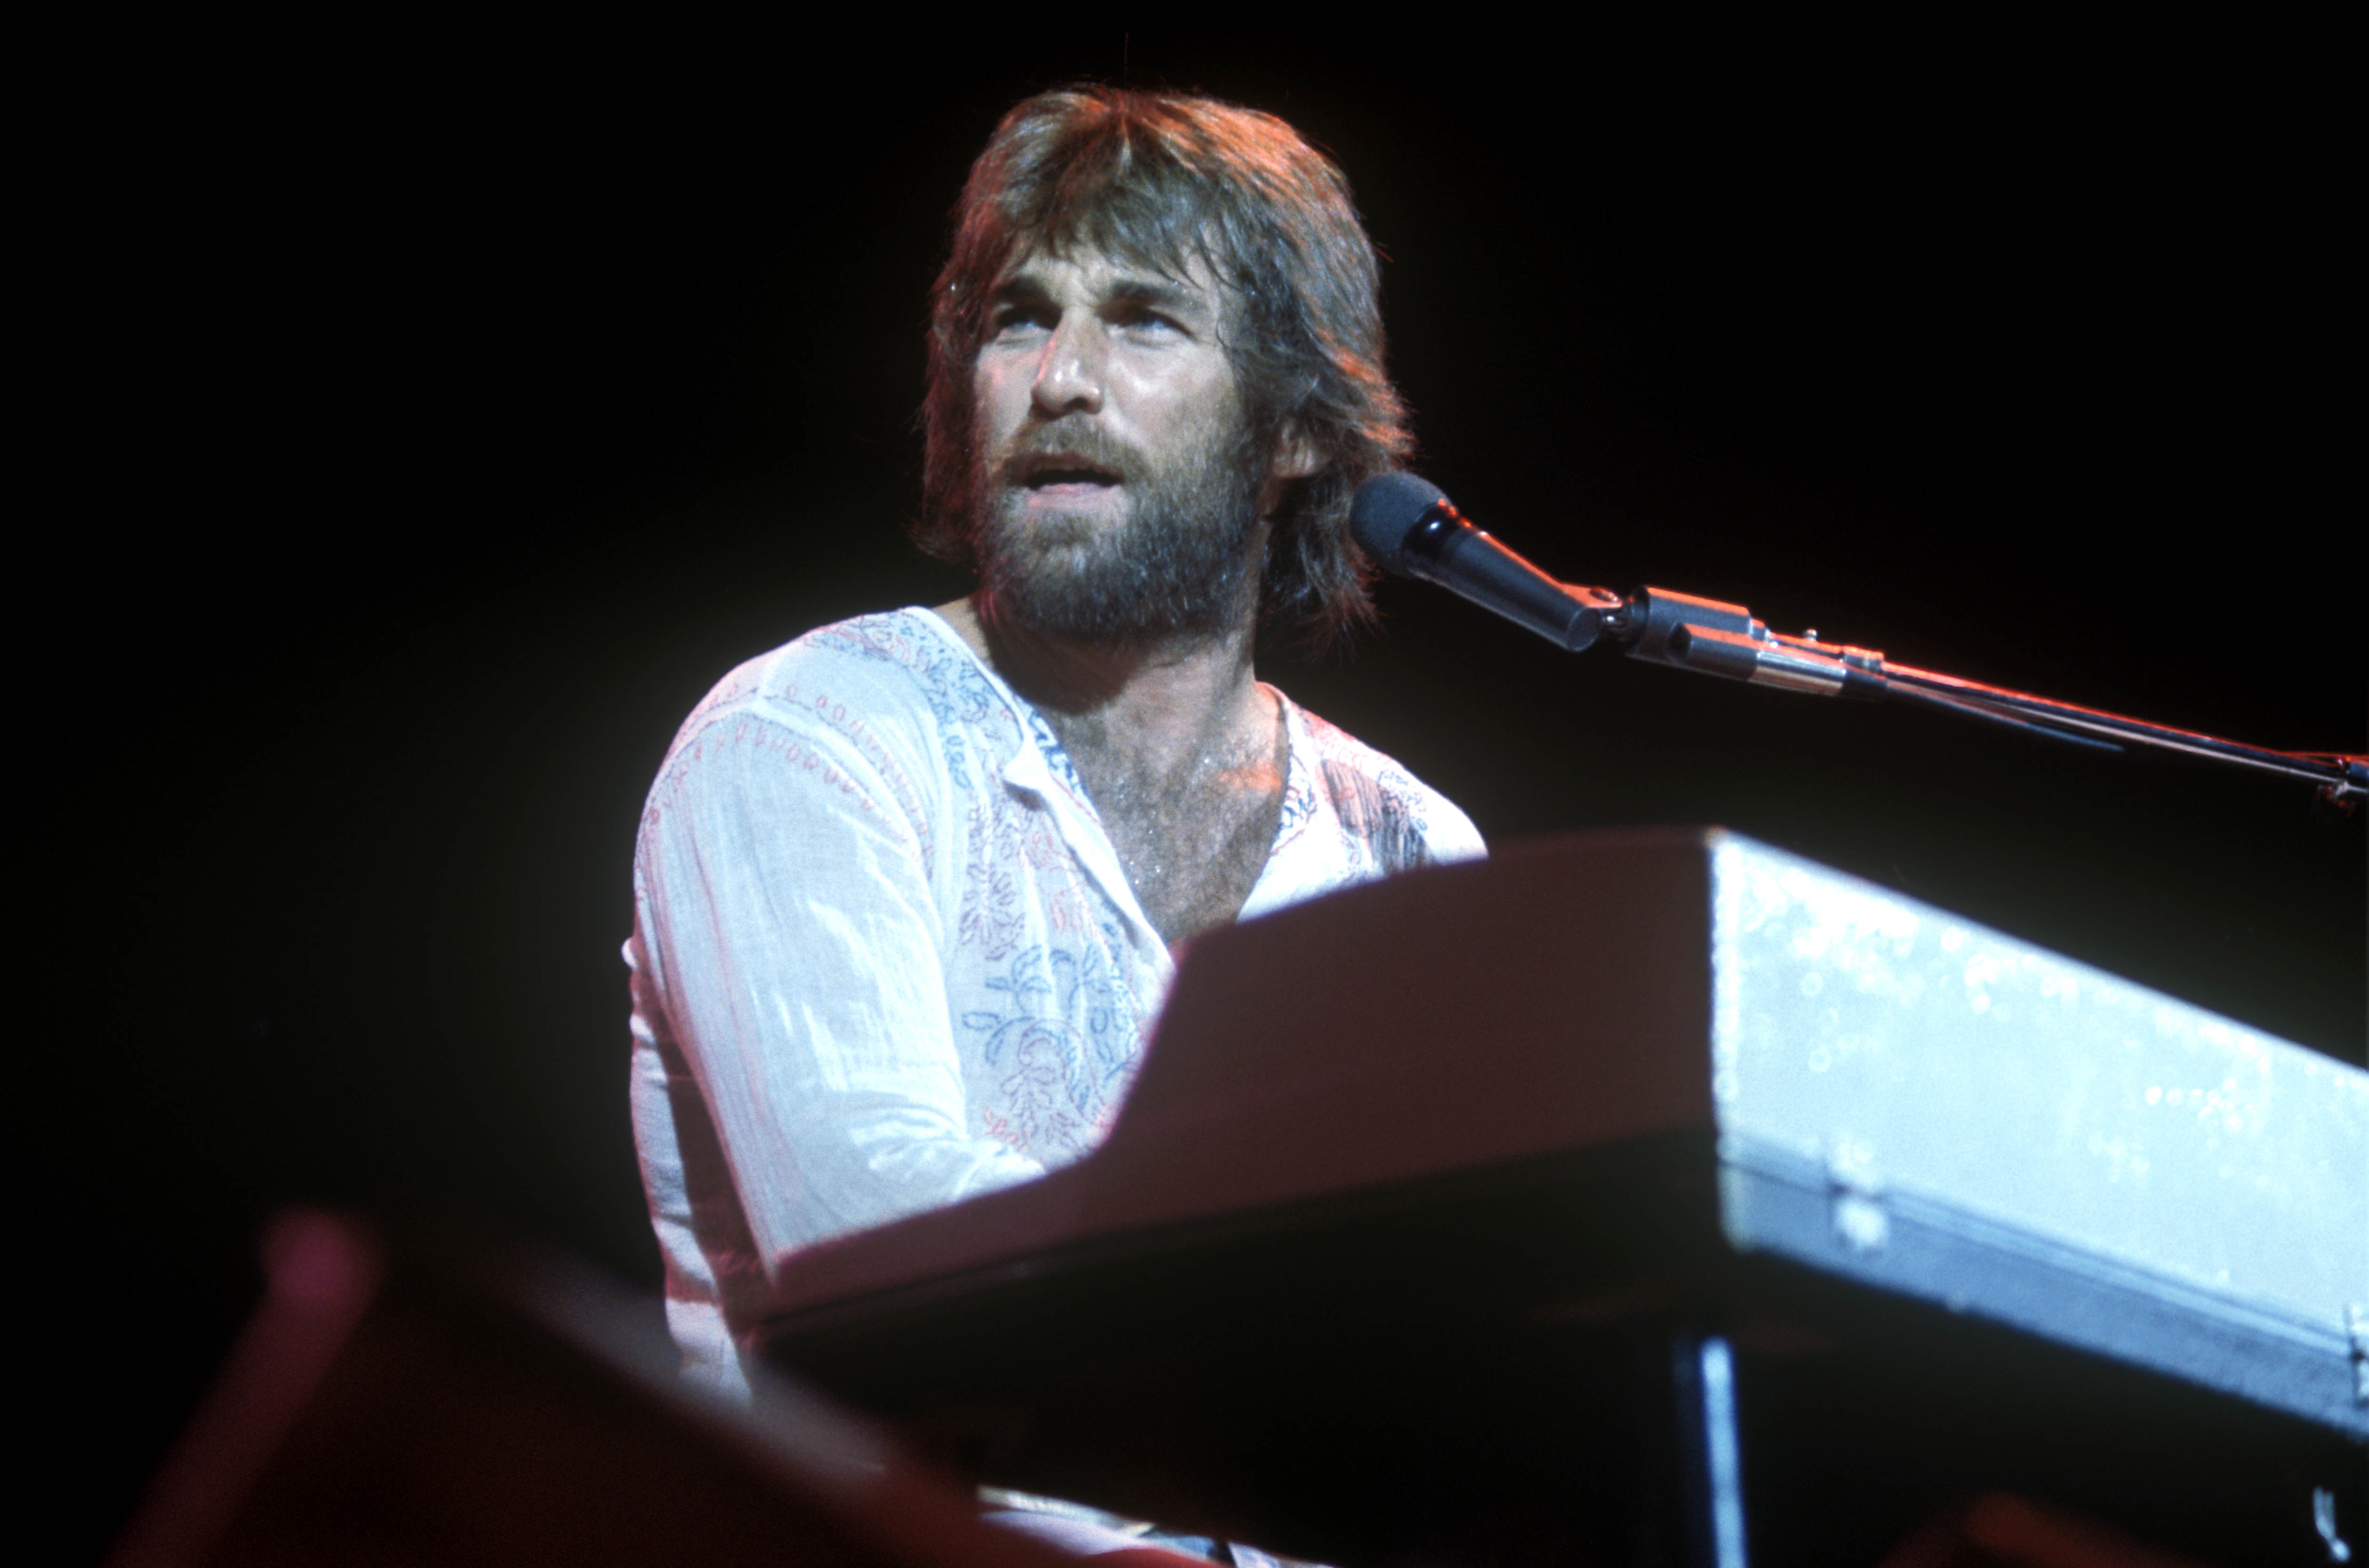 Dennis Wilson of the Beach Boys performing on stage, keyboards